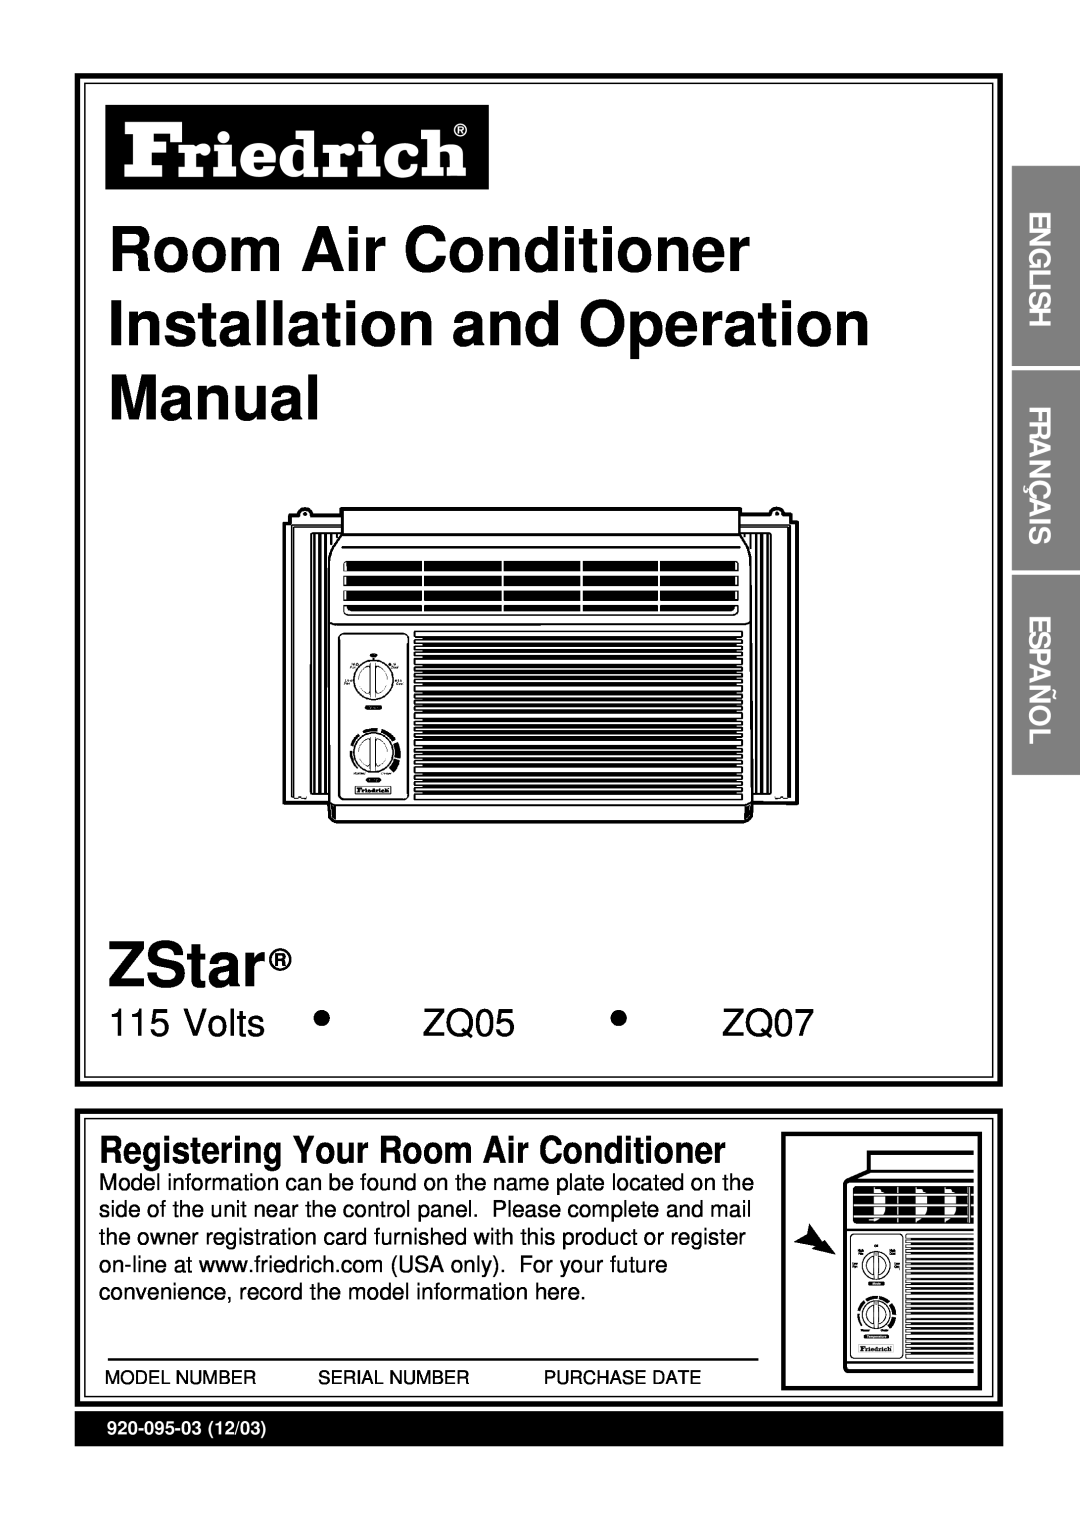 Friedrich operation manual Room Air Conditioner Installation and Operation, Manual ZStar, Volts, ZQ05, ZQ07 